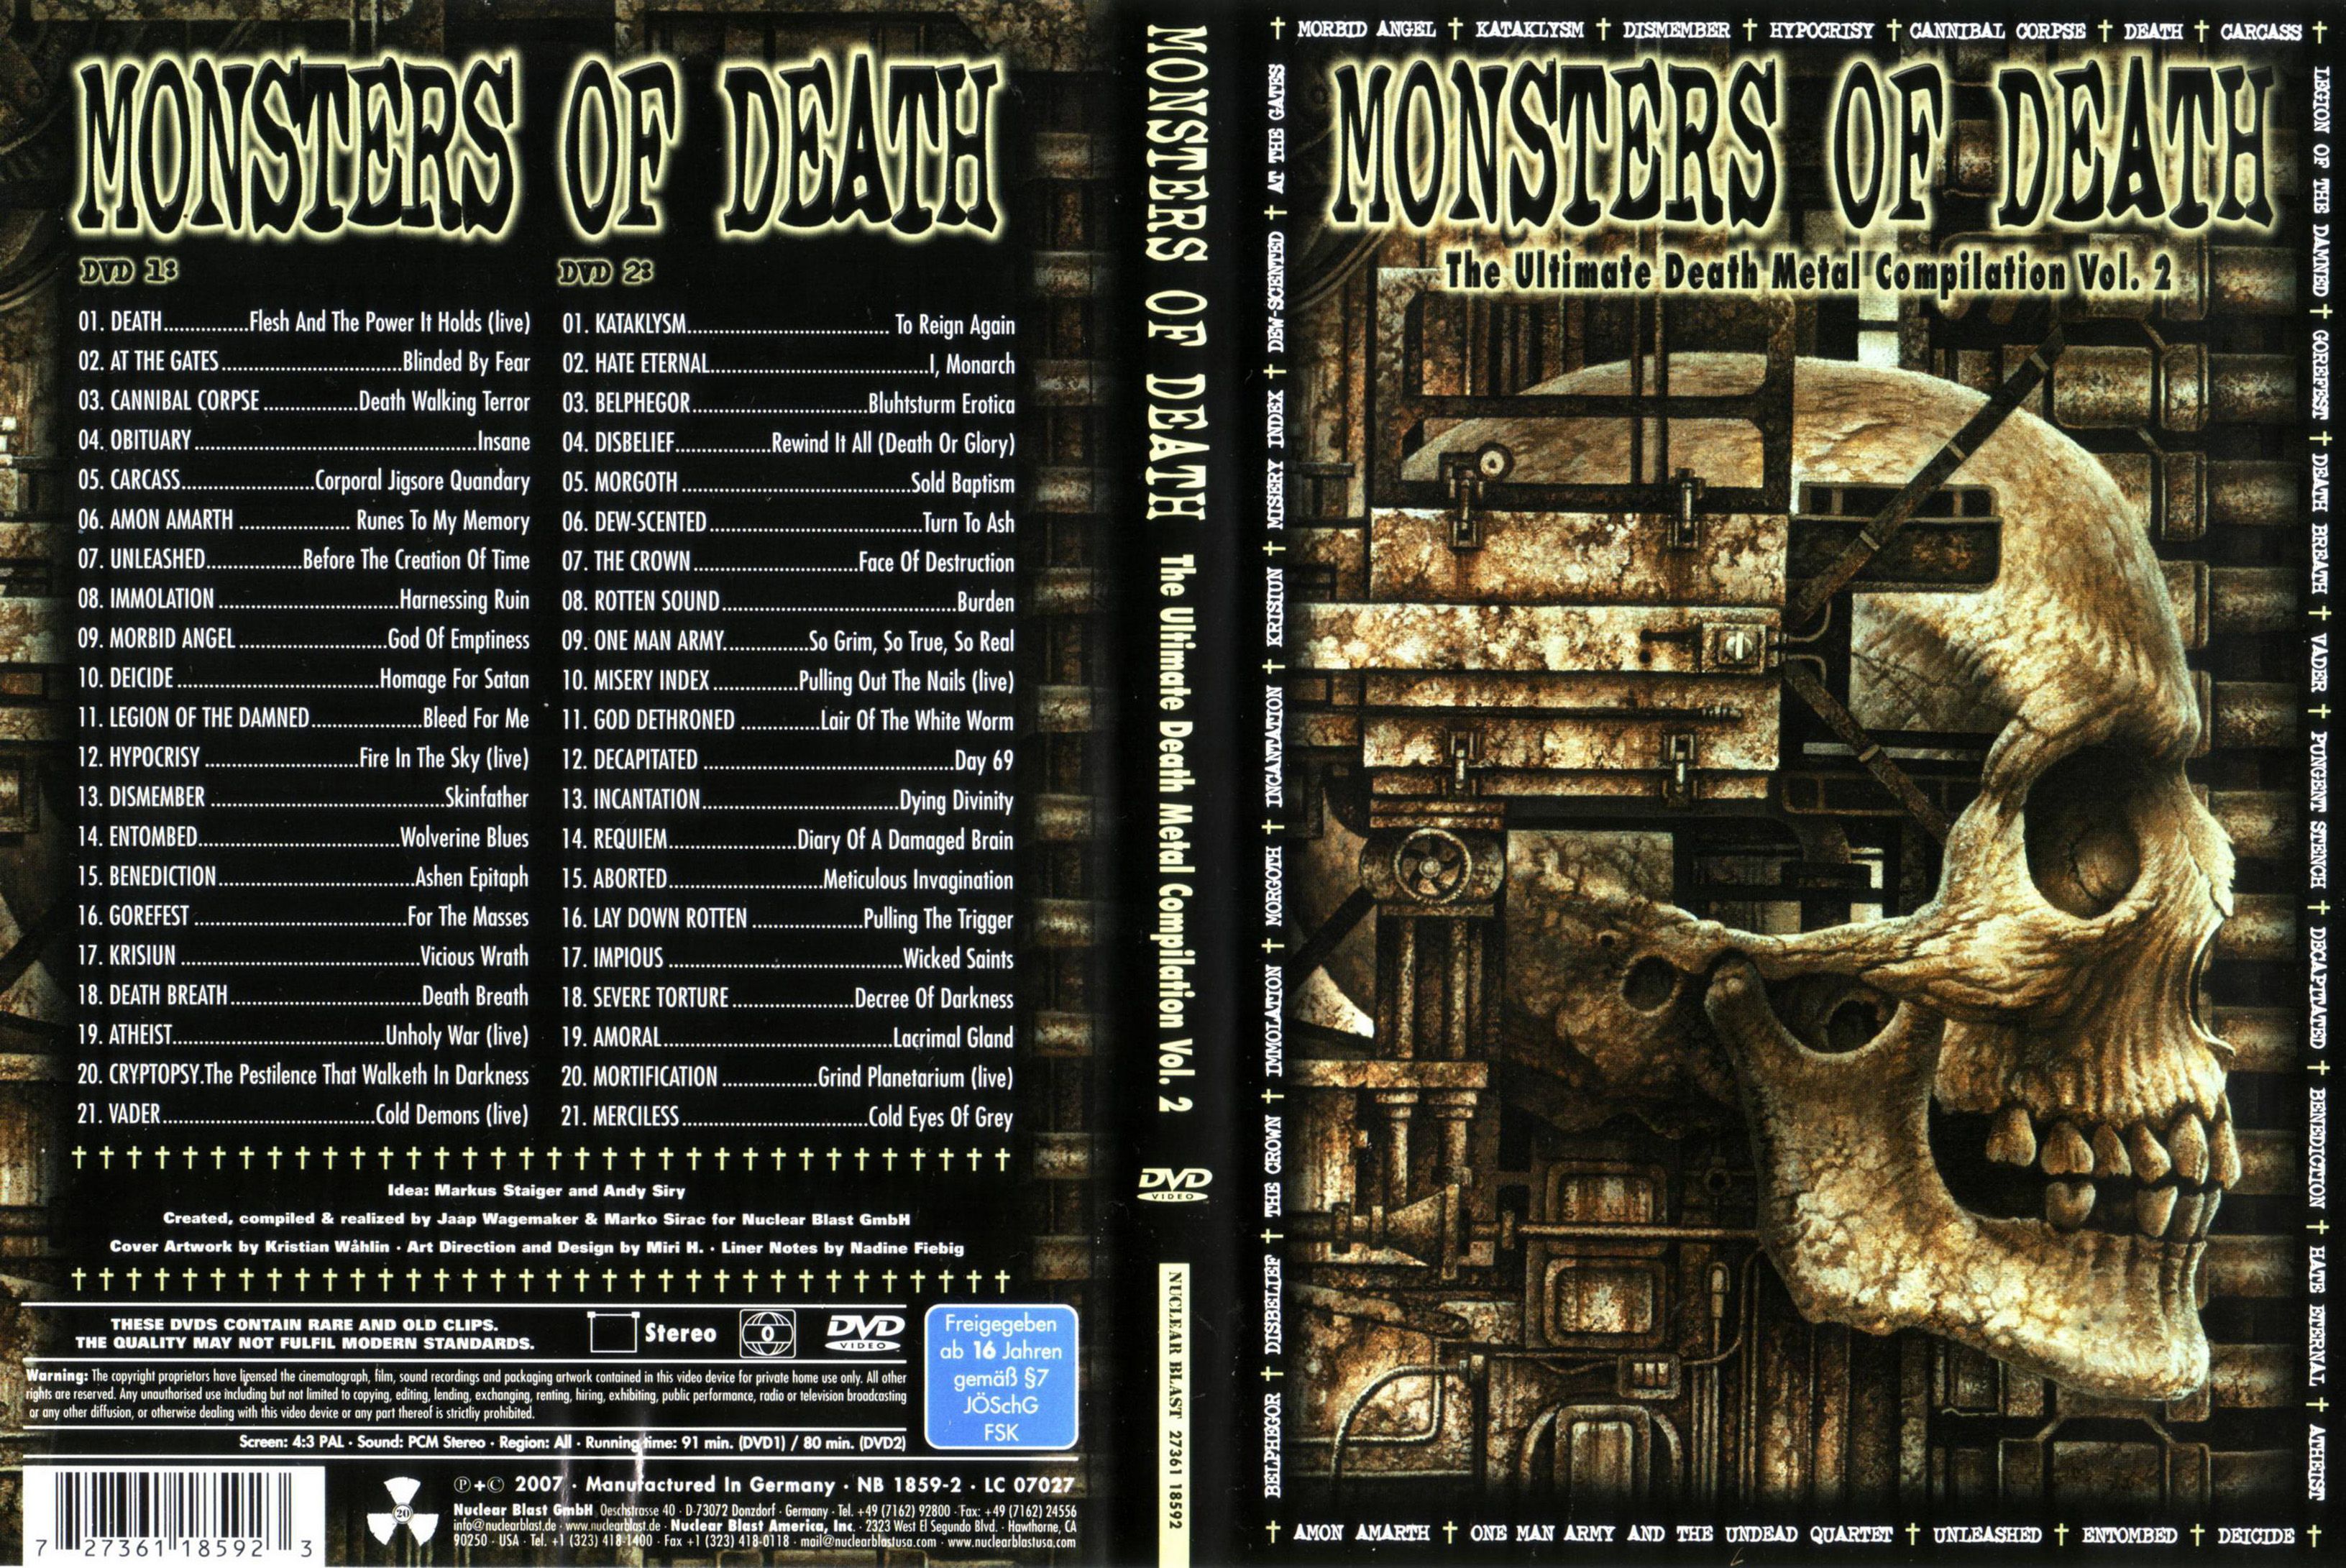 Jaquette DVD Monsters of death The ultimate death metal compilation vol 2